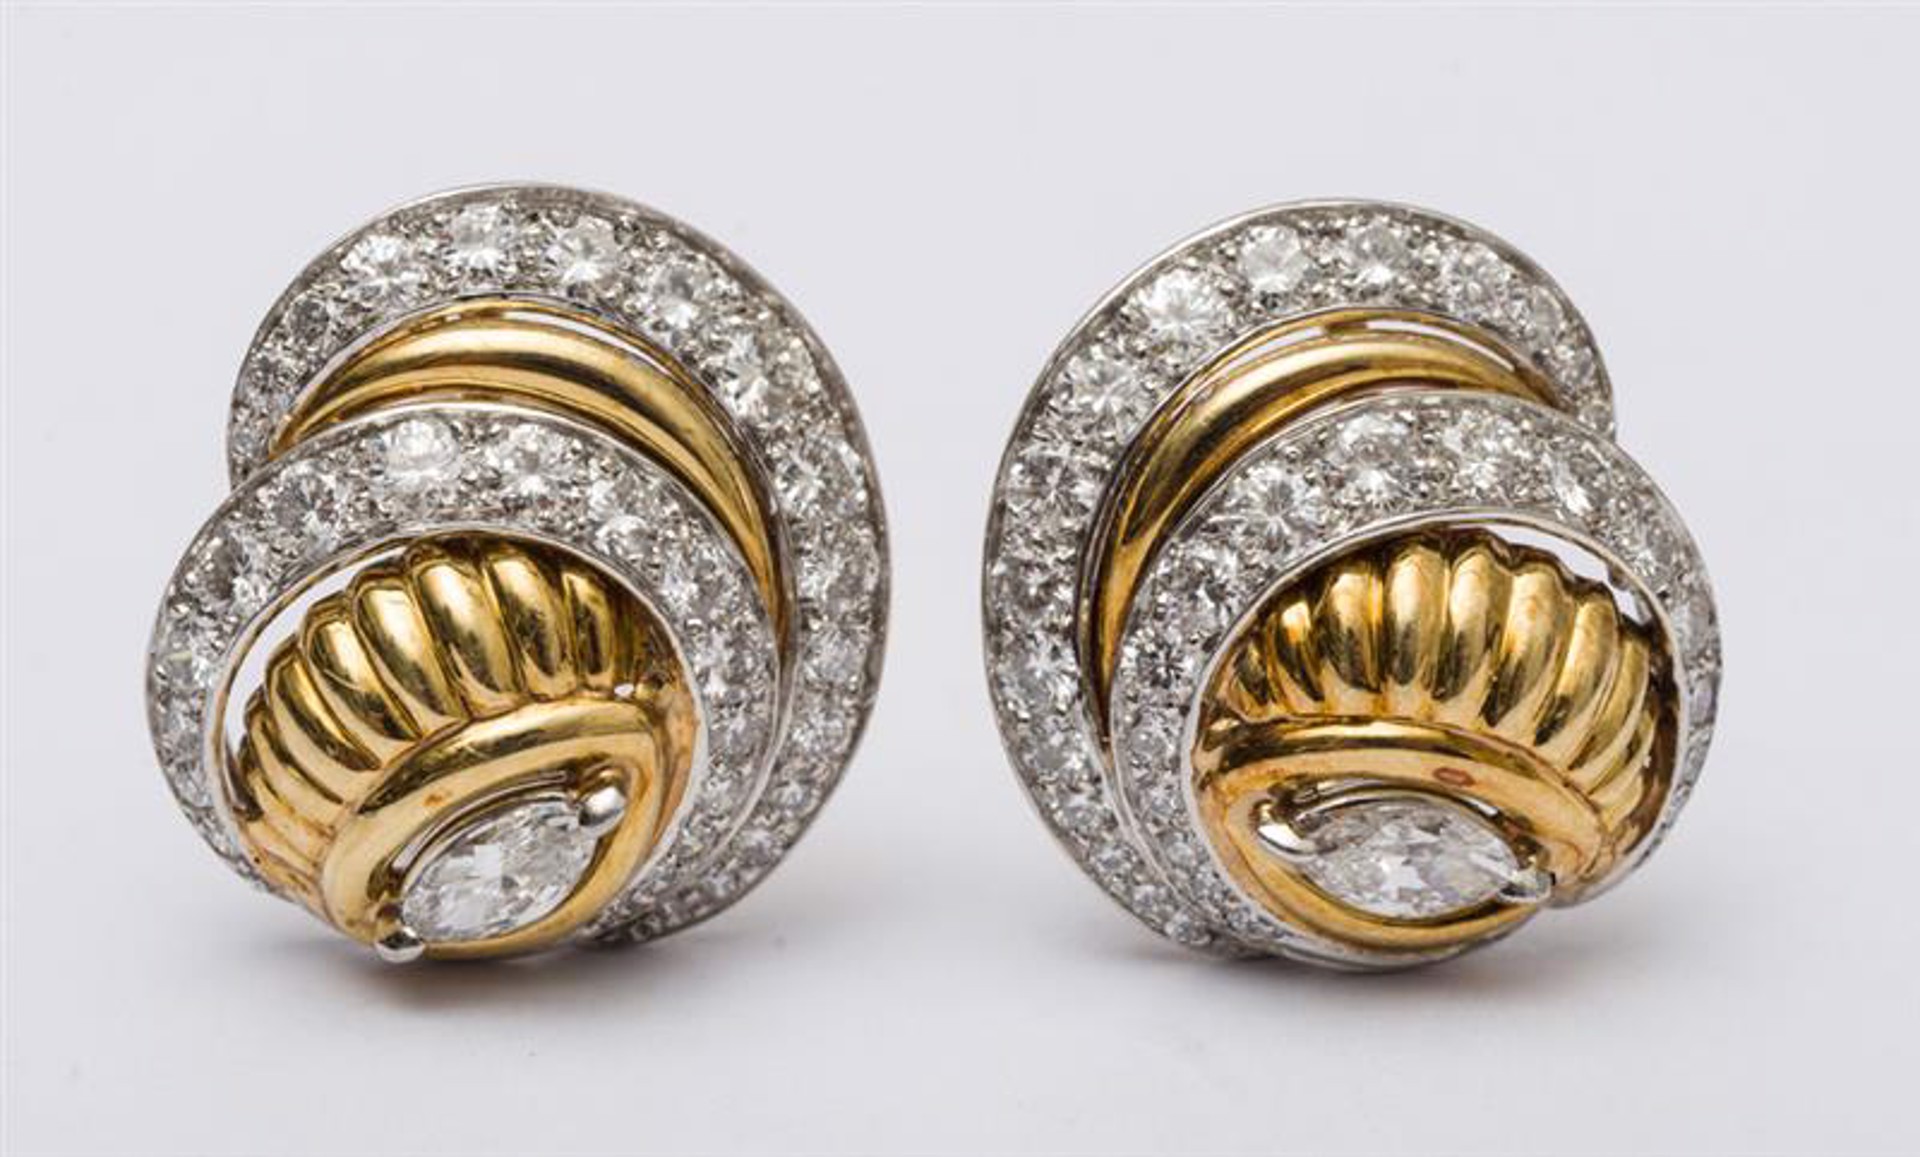 PAIR OF YELLOW GOLD AND PLATINUM SWIRL EARRINGS